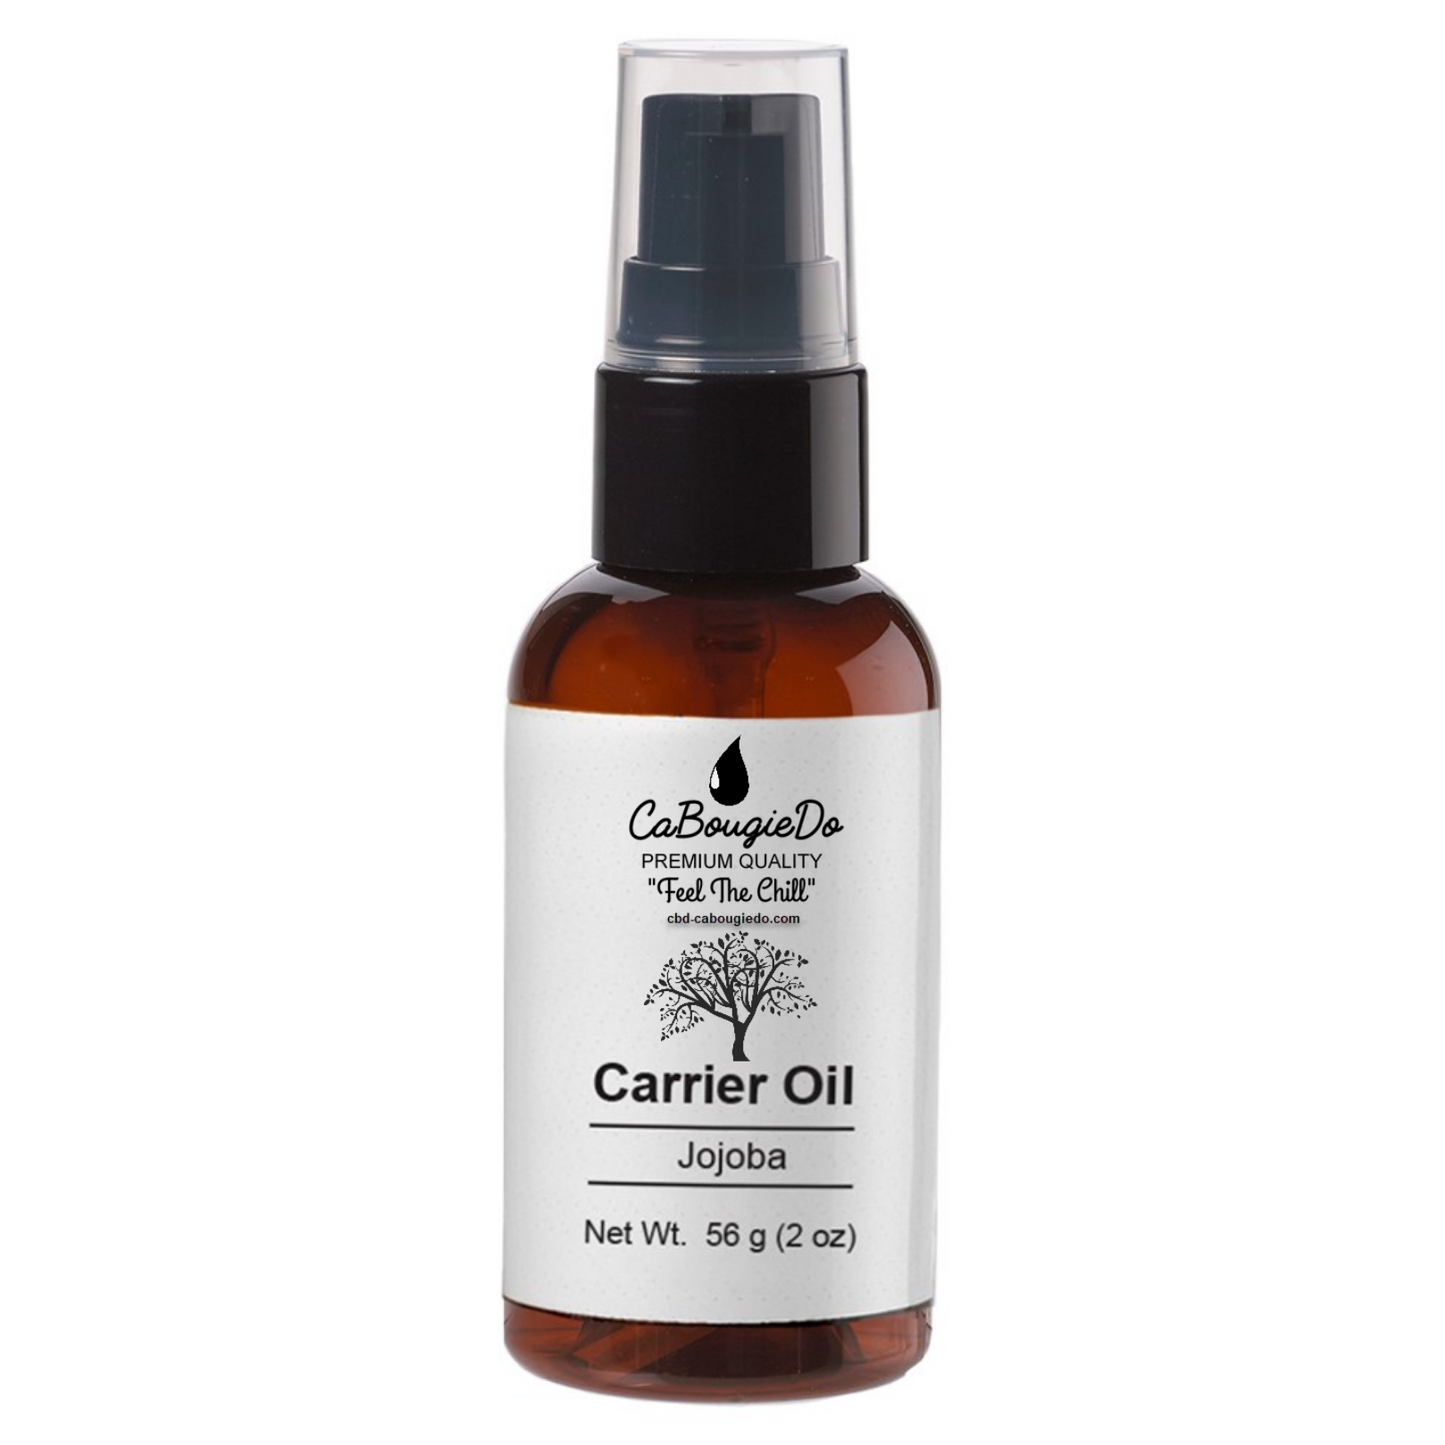 Carrier Oil - Buy All Five Carrier Oils and Save